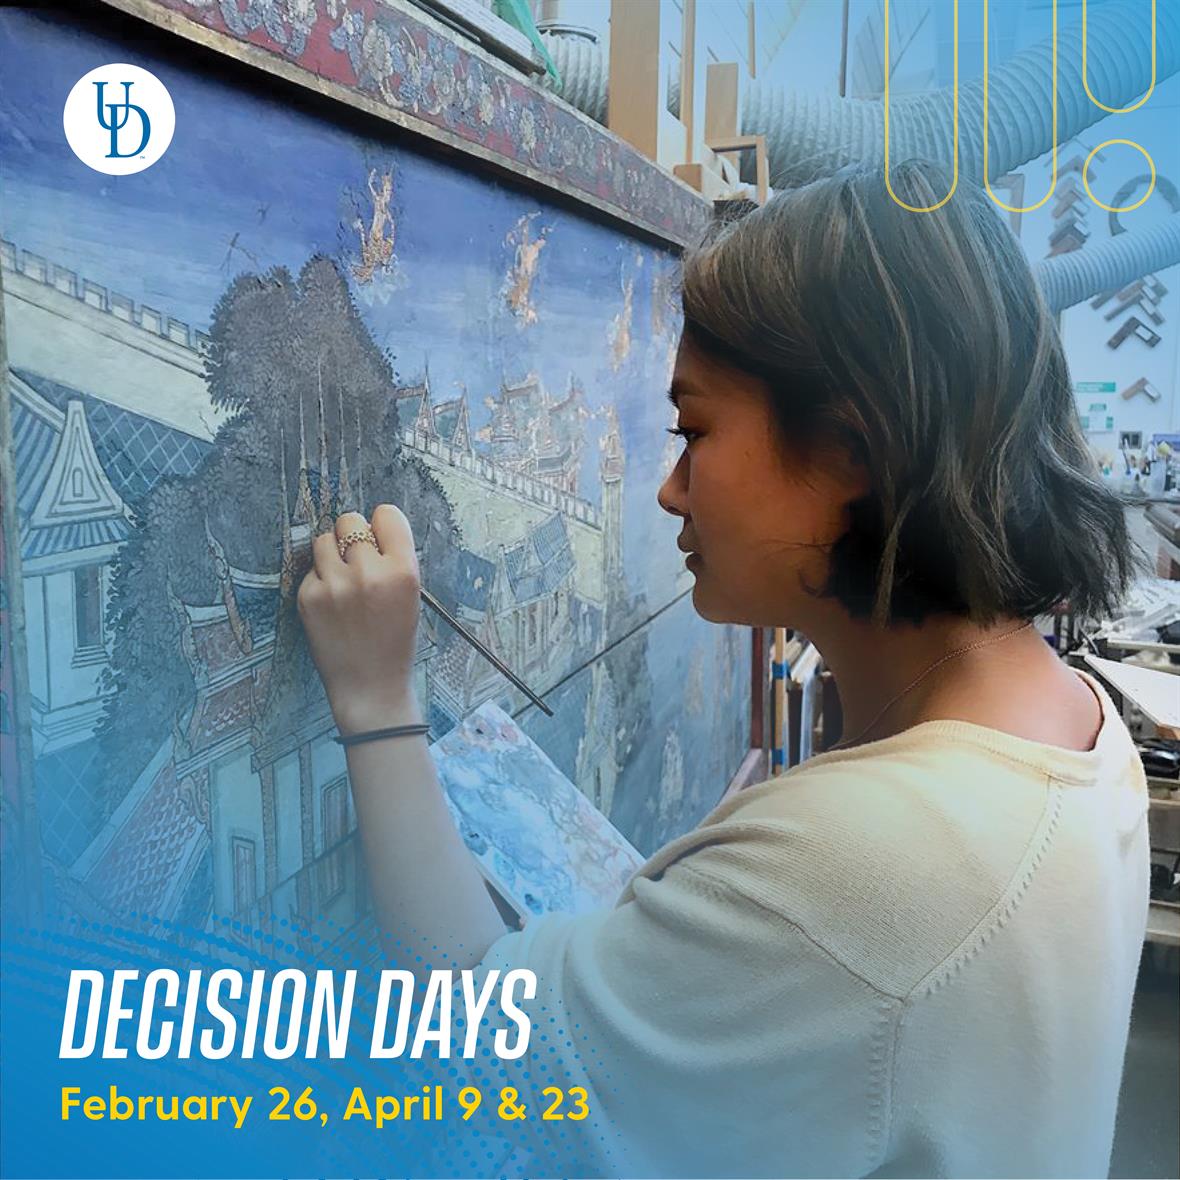 An image of a student working on a painting. Text: Decision Days - February 26, April 9 & 23.